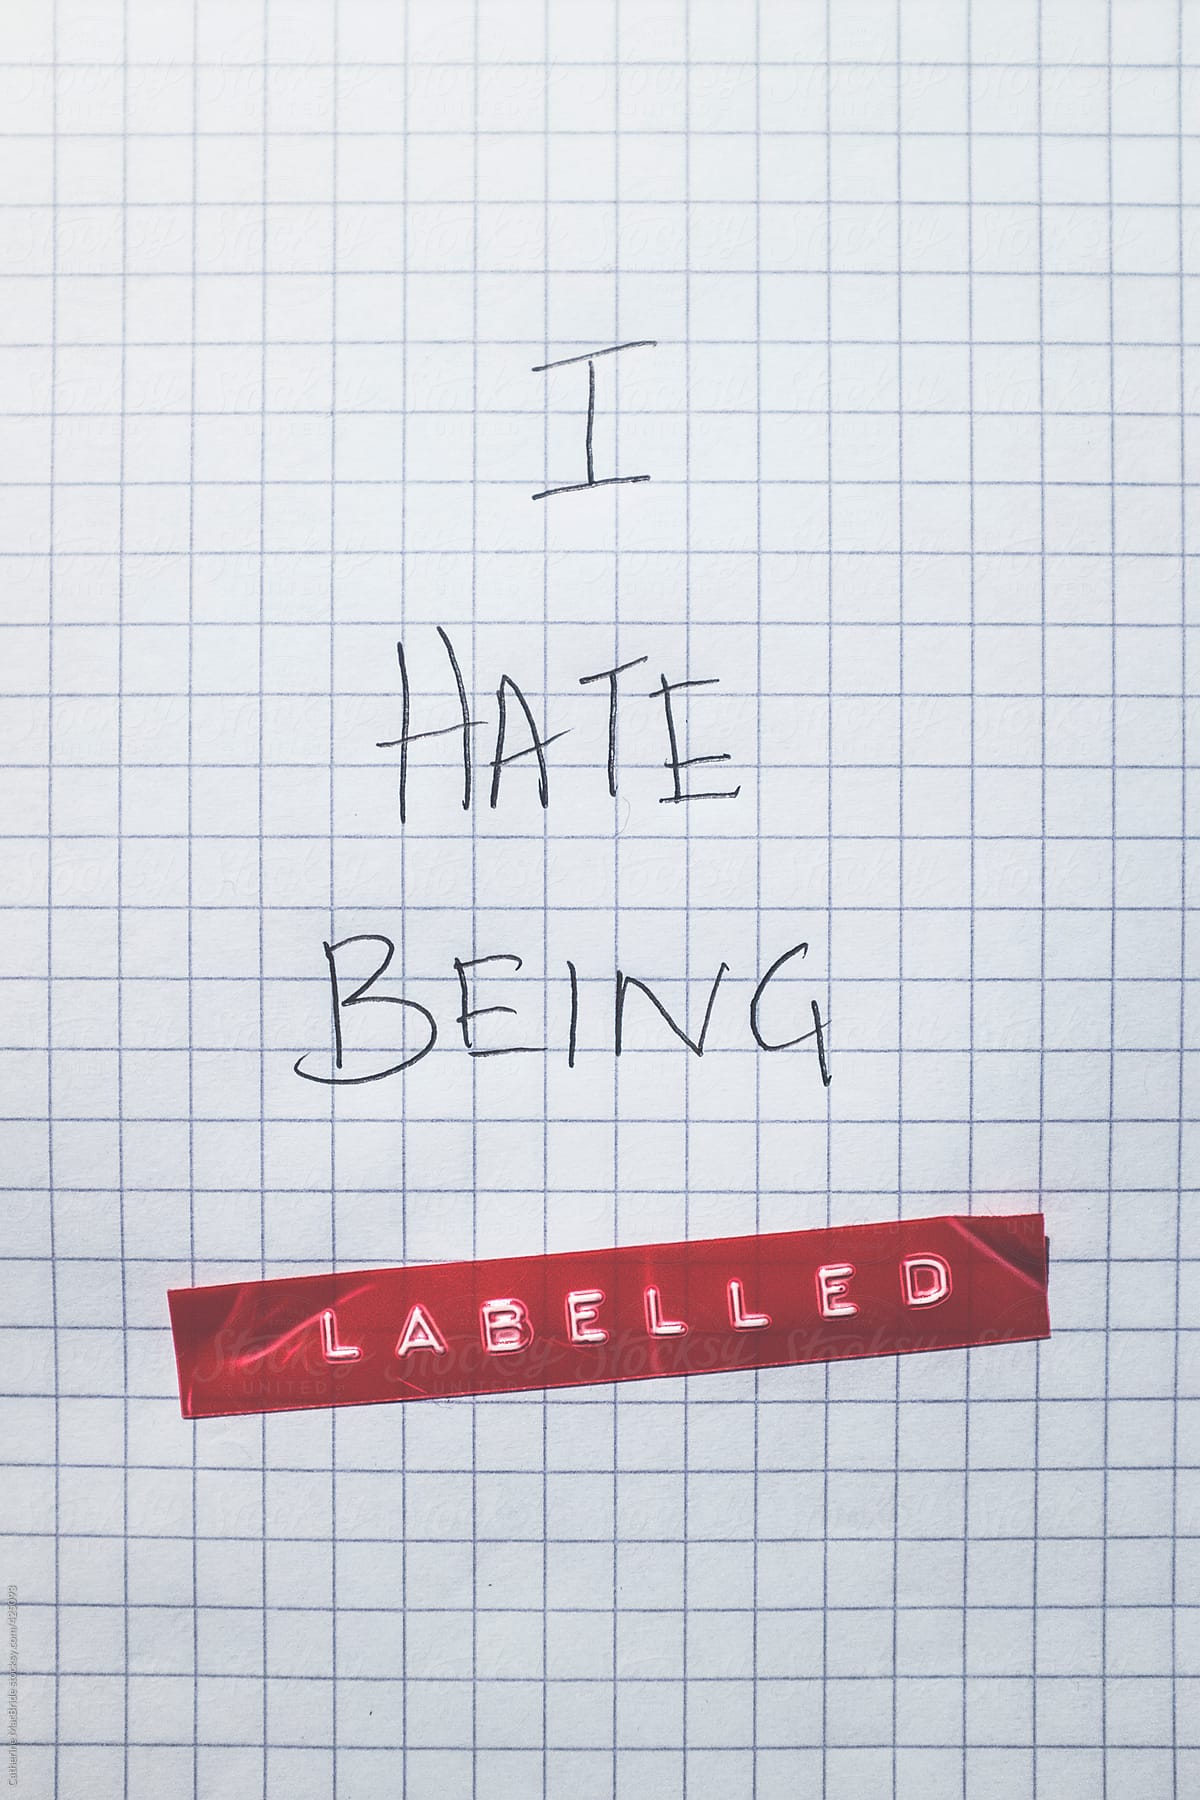 I HATE BEING LABELLED!